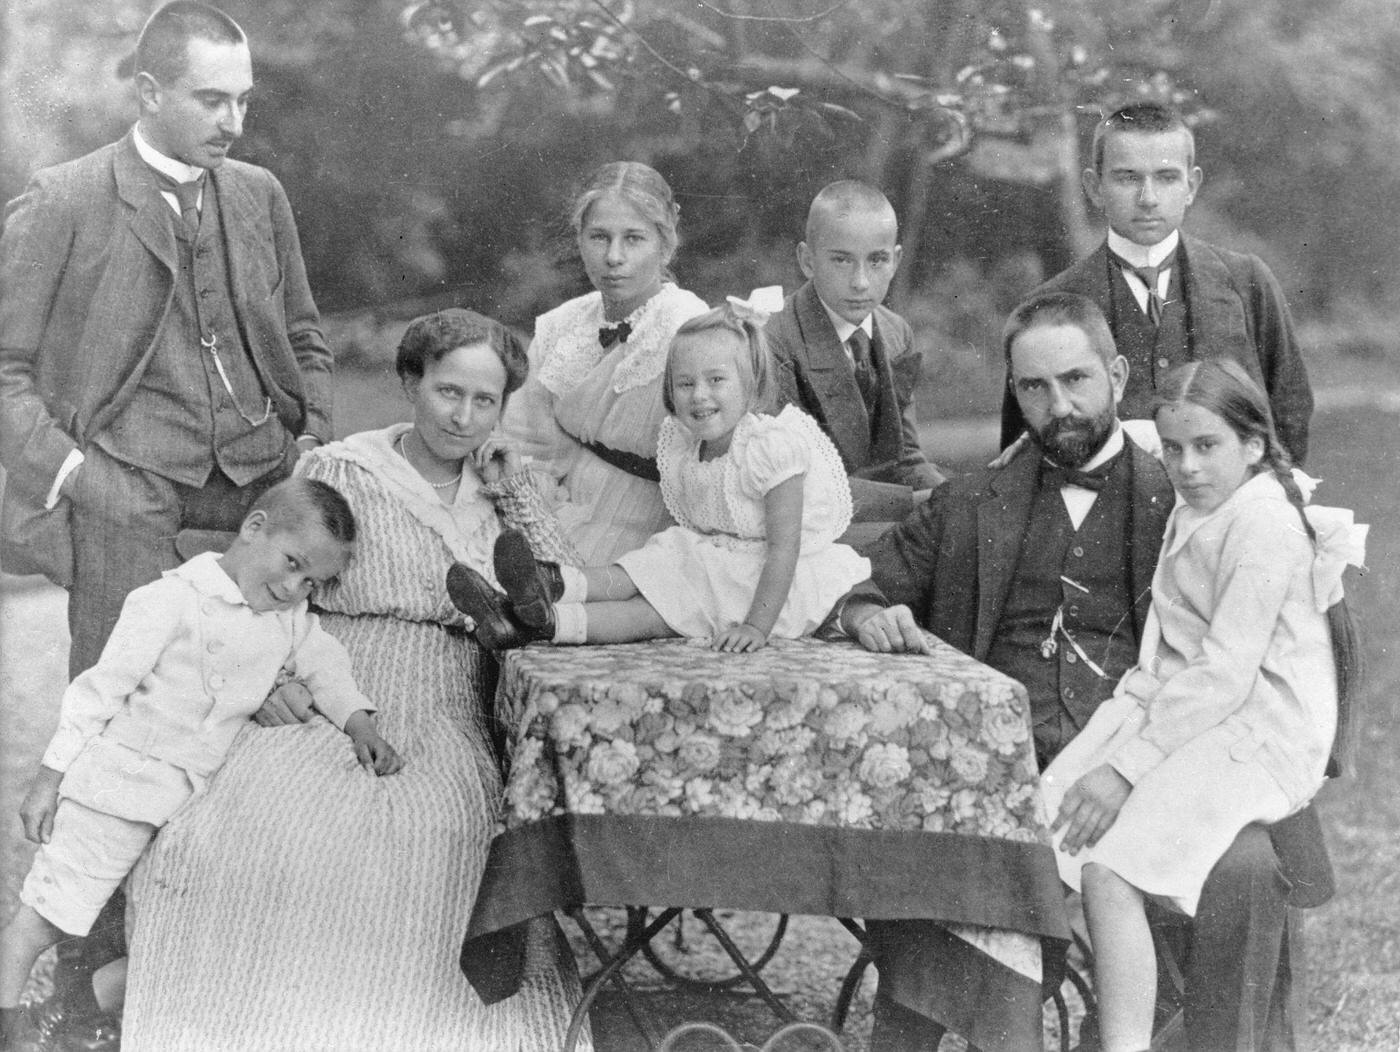 Hugo Stinnes with his family including his wife and children Edmund, Ernst, Cläre, Clärenore, Else, Otto, and Hugo Jr., 1923.